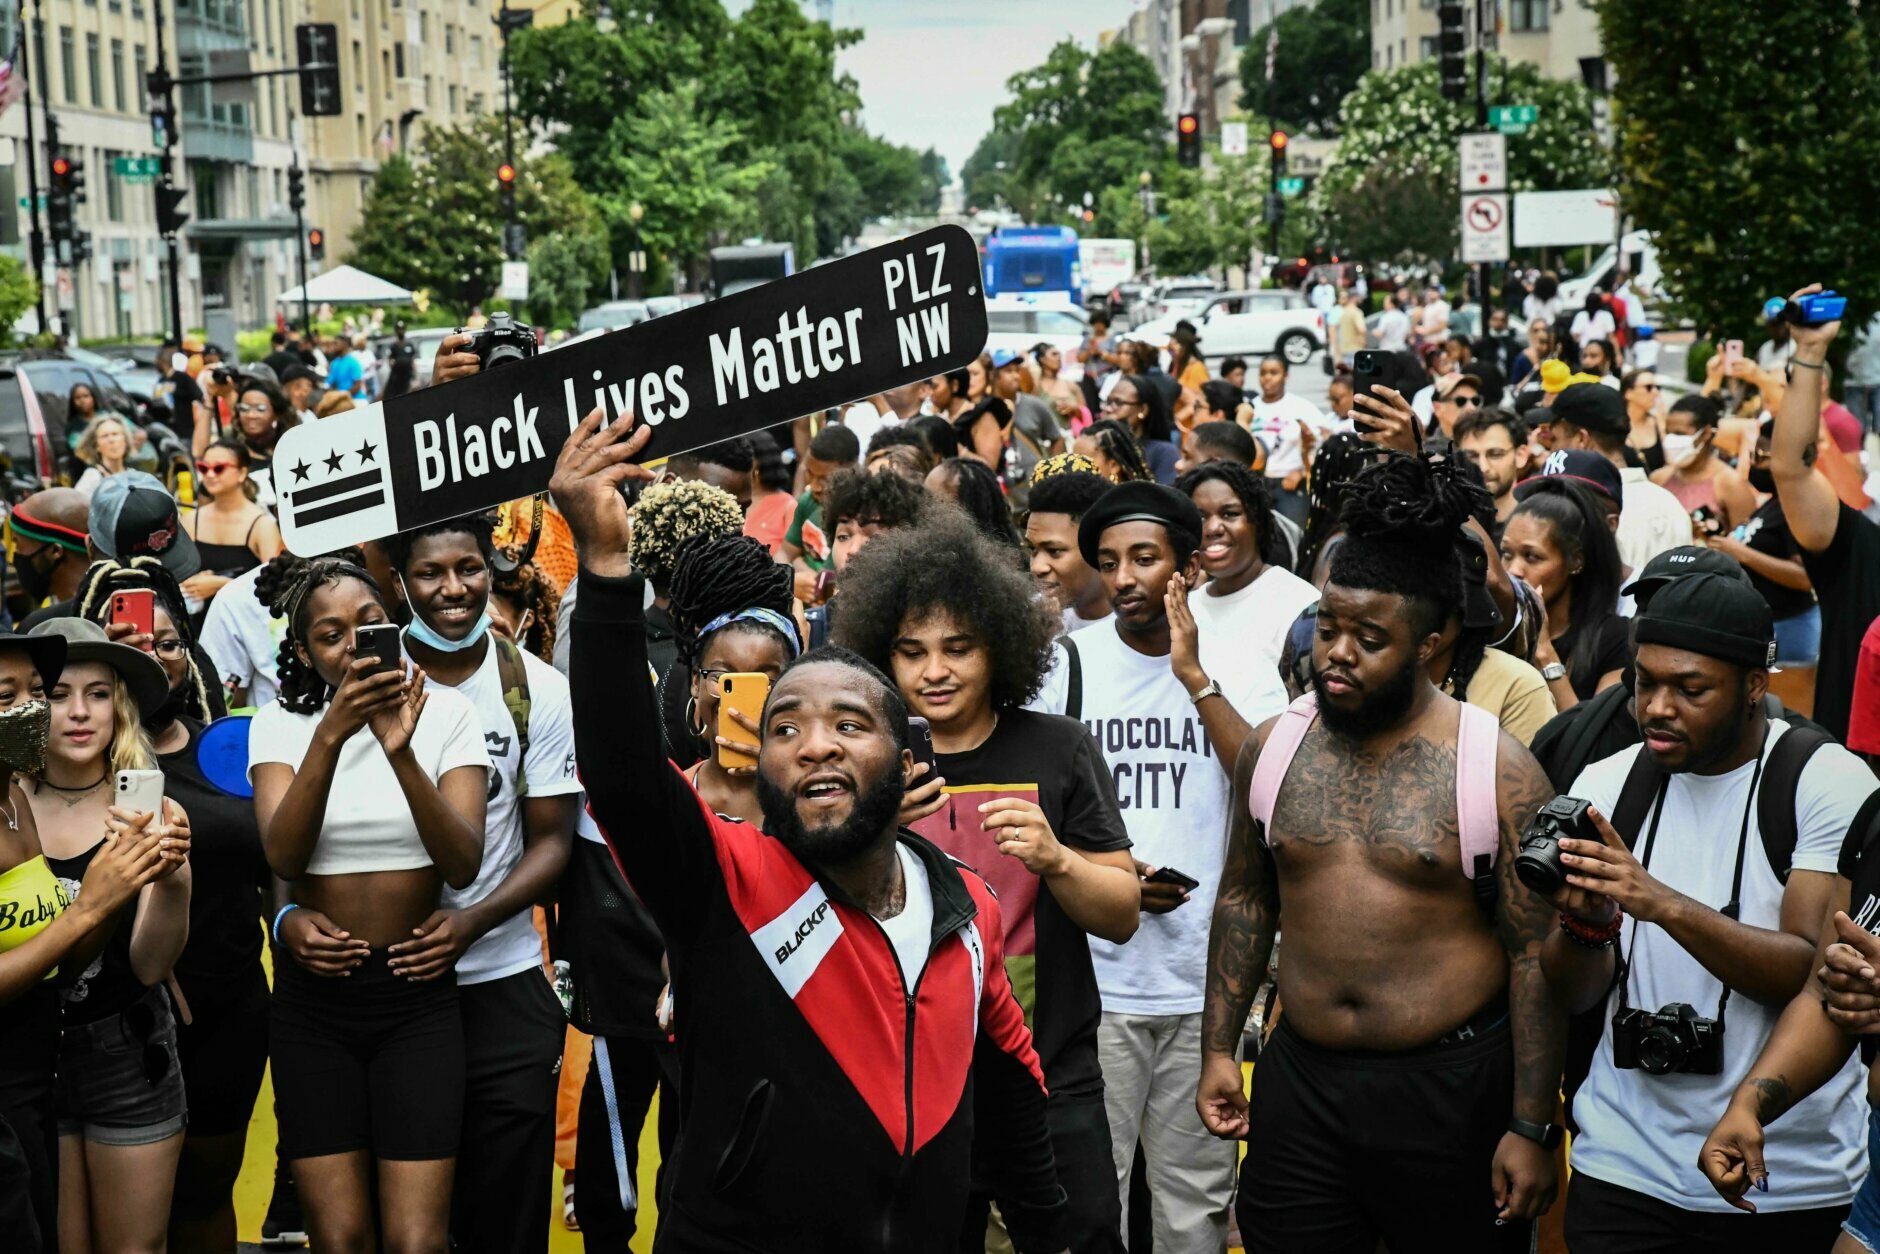 <p>The Million Moe March is led by the group Long Live GoGo, a local organization that uses Go-Go music to protest against gentrification and police brutality.</p>
<p>&nbsp;</p>
